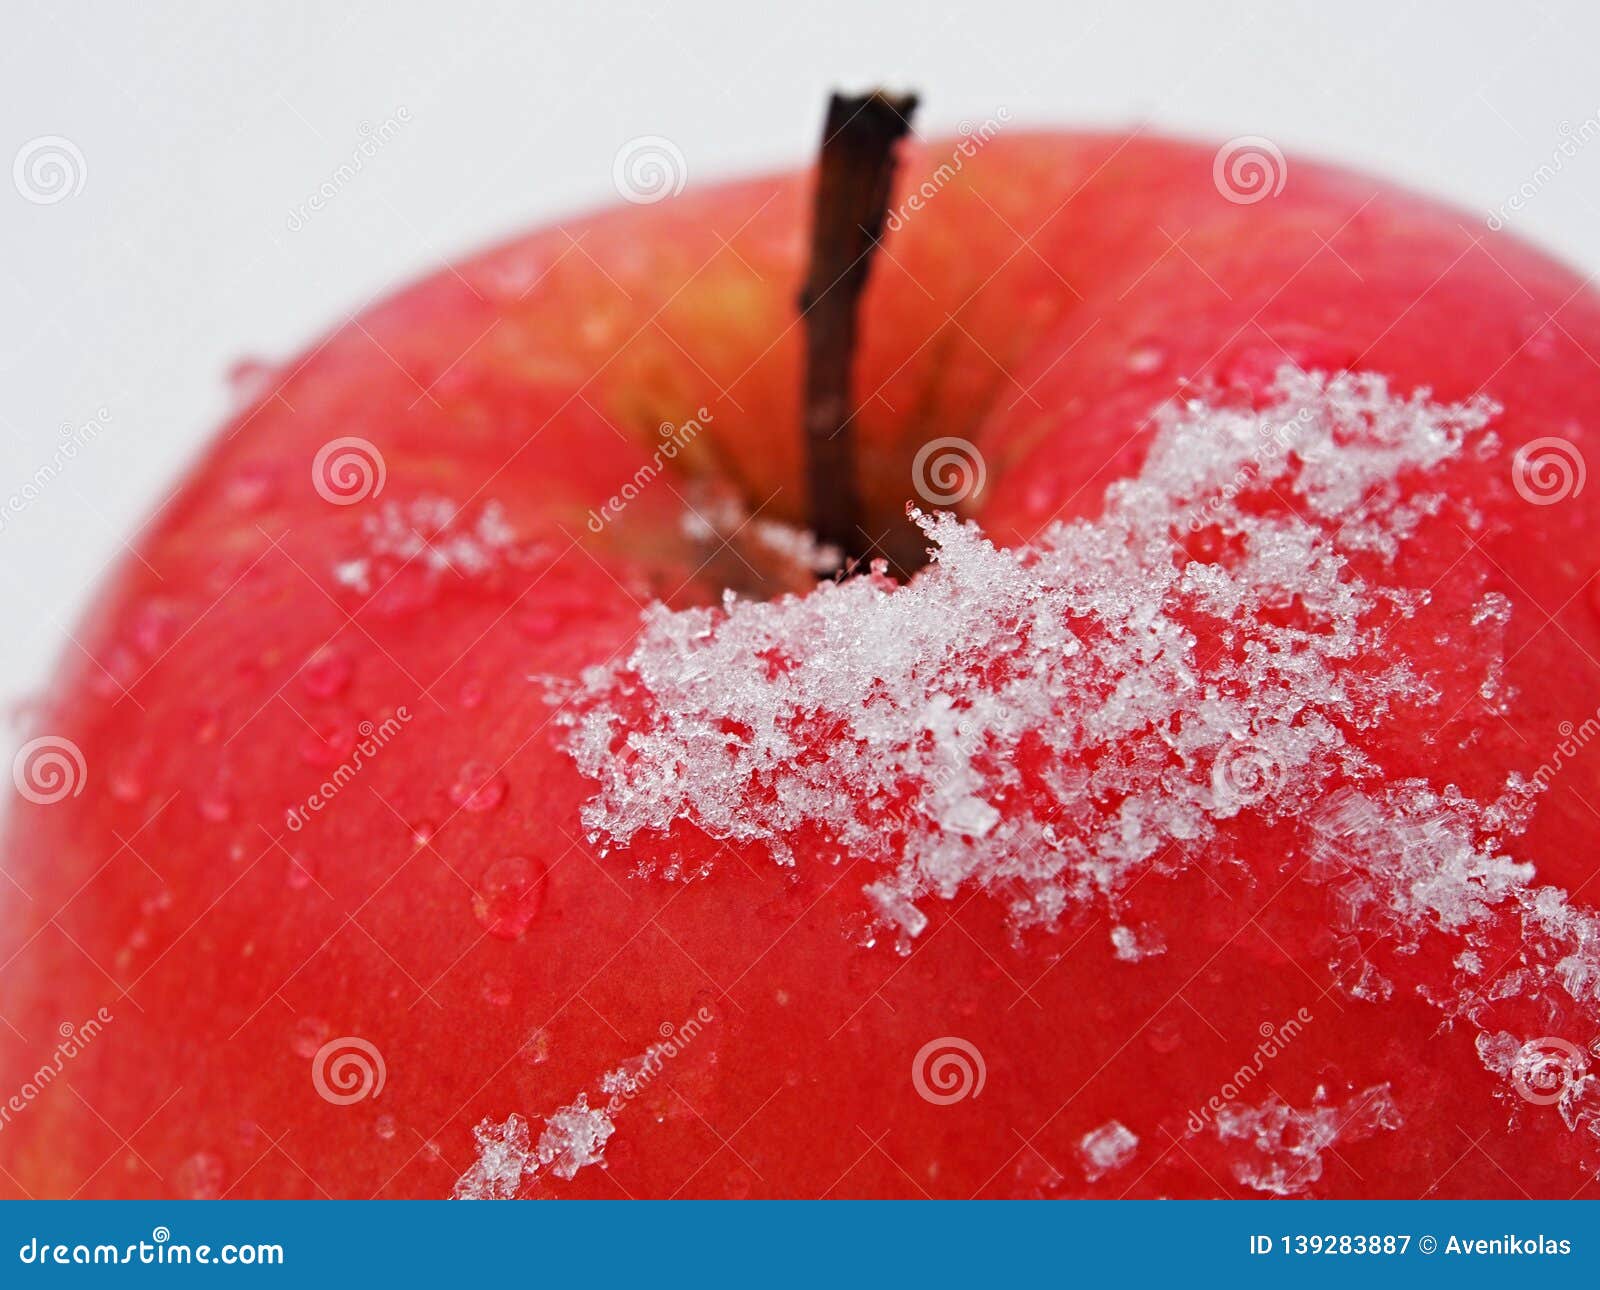 Detail of Red Apple in the Snow Stock Image - Image of healthy, drops ...